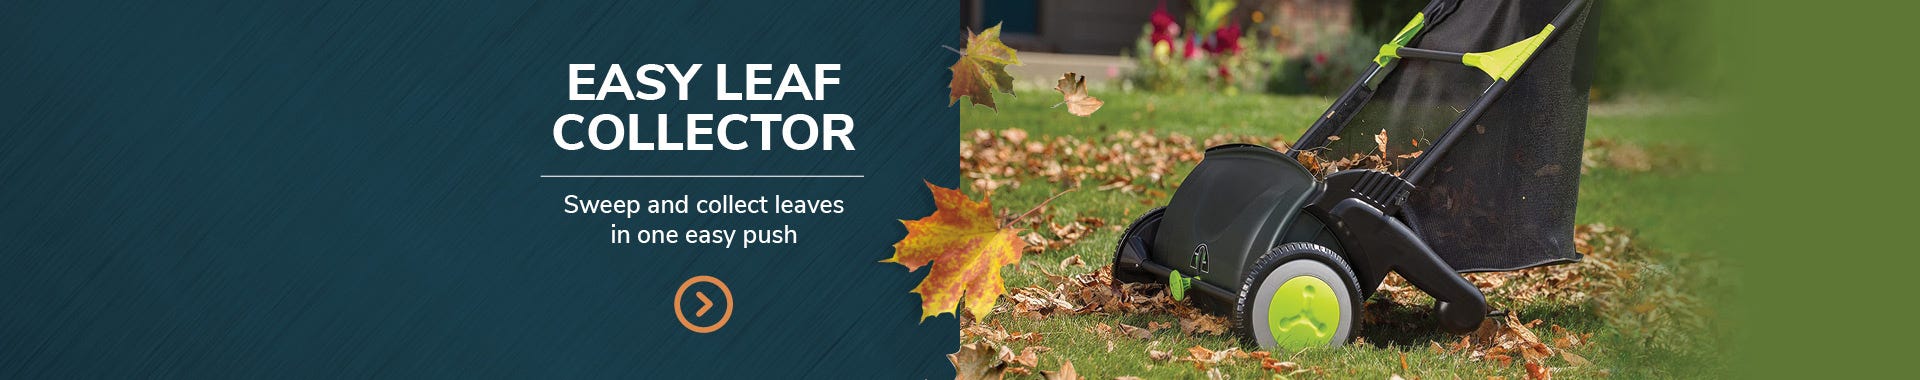 Easy Leaf Collector